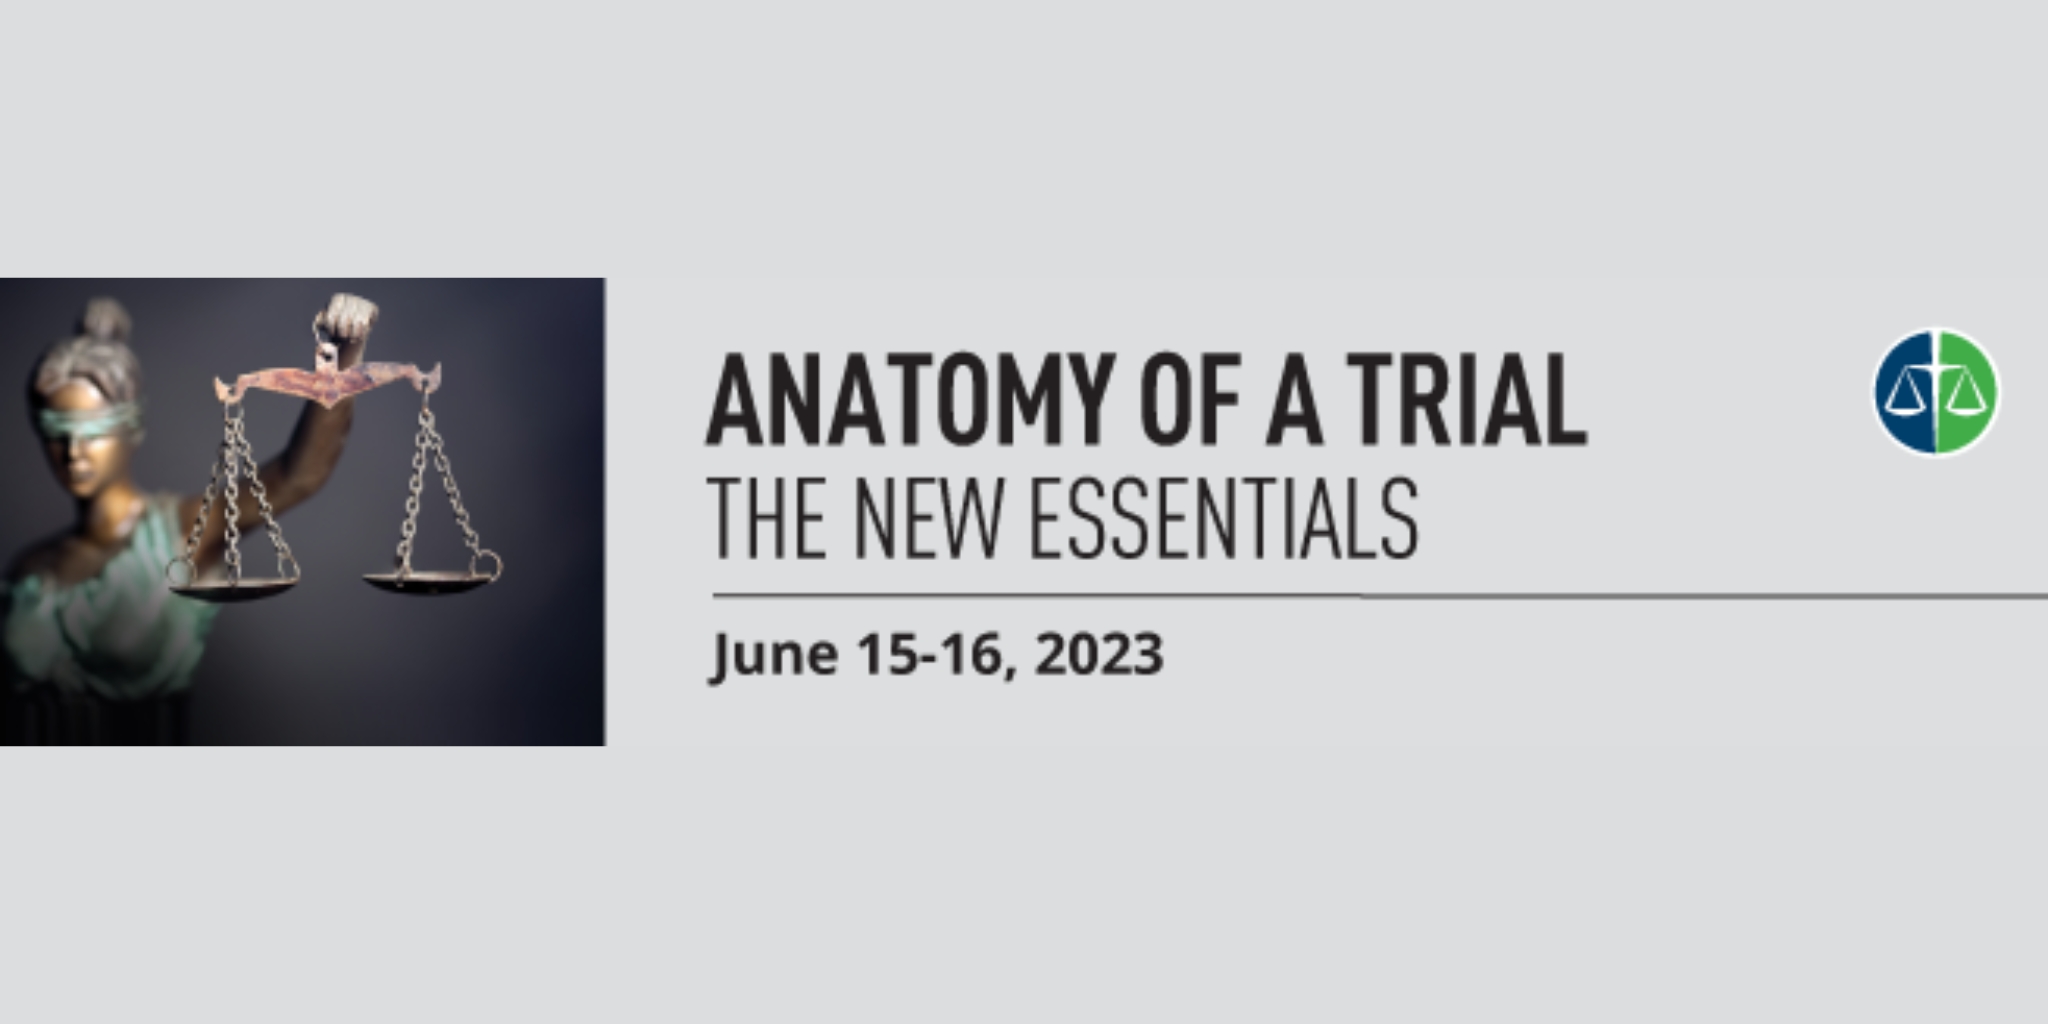 Anatomy of a Trial: The New Essentials